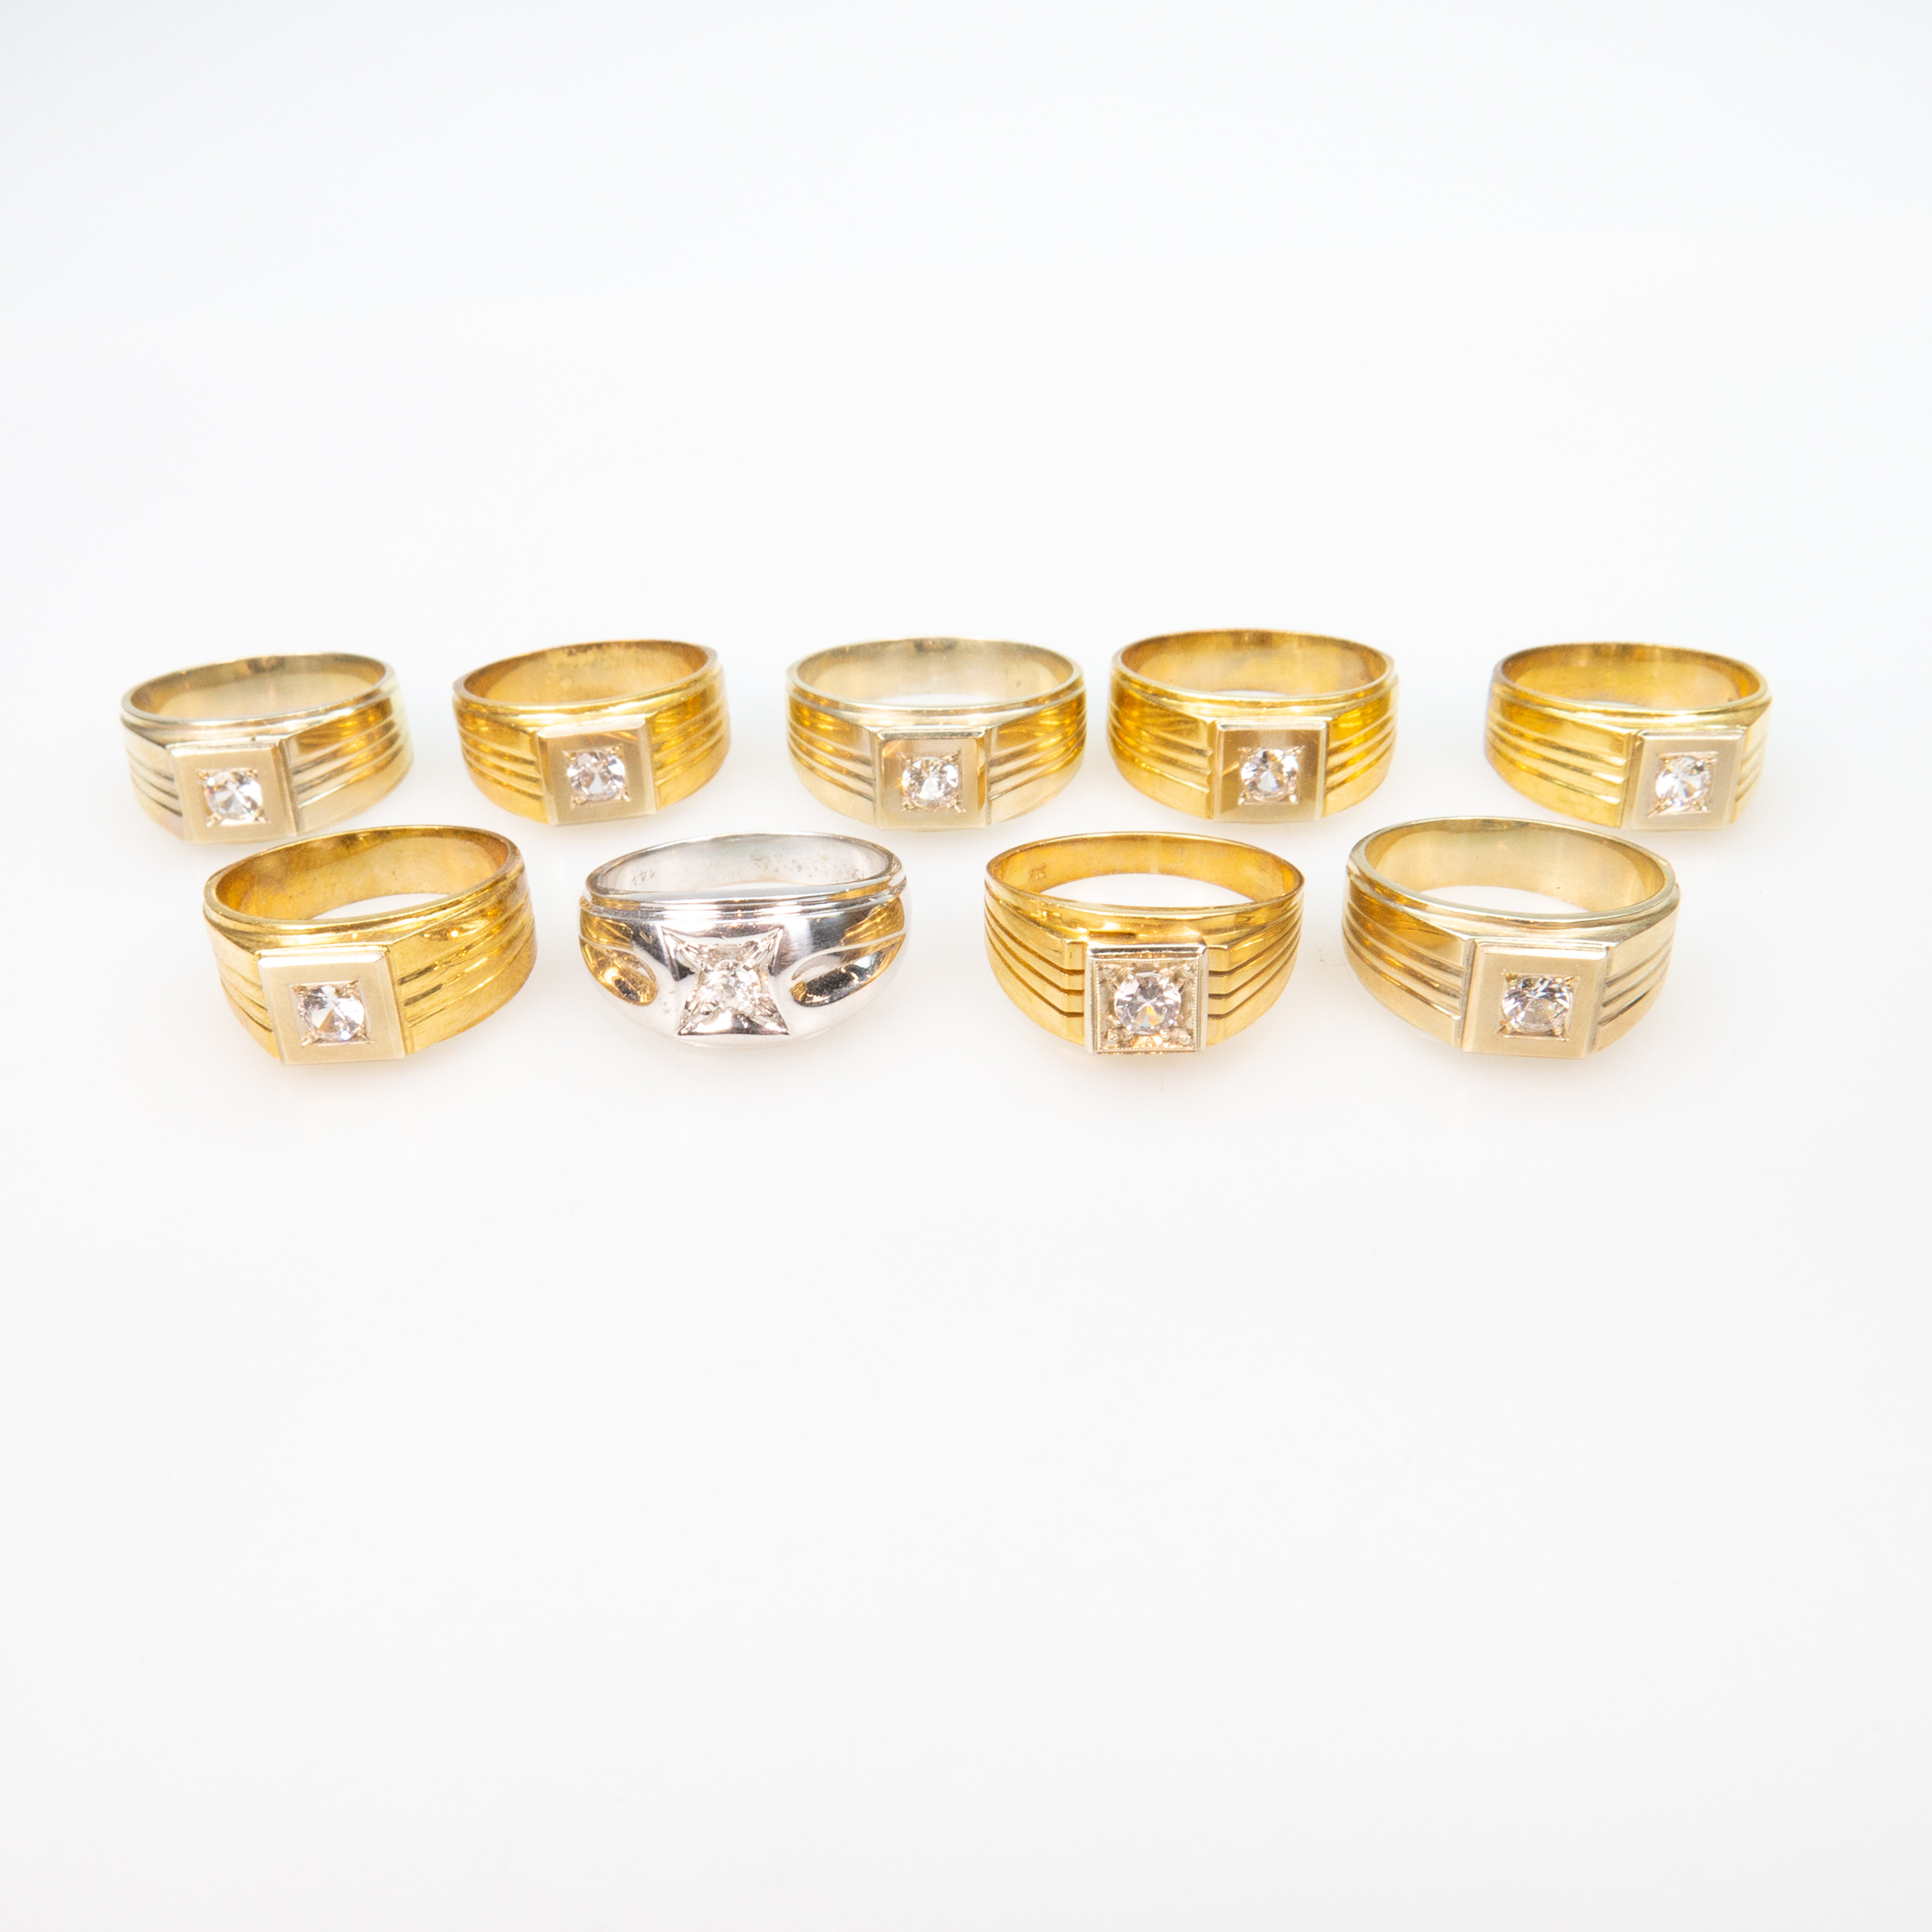 1 x 14k White Gold And 8 x 18k Yellow Gold Rings